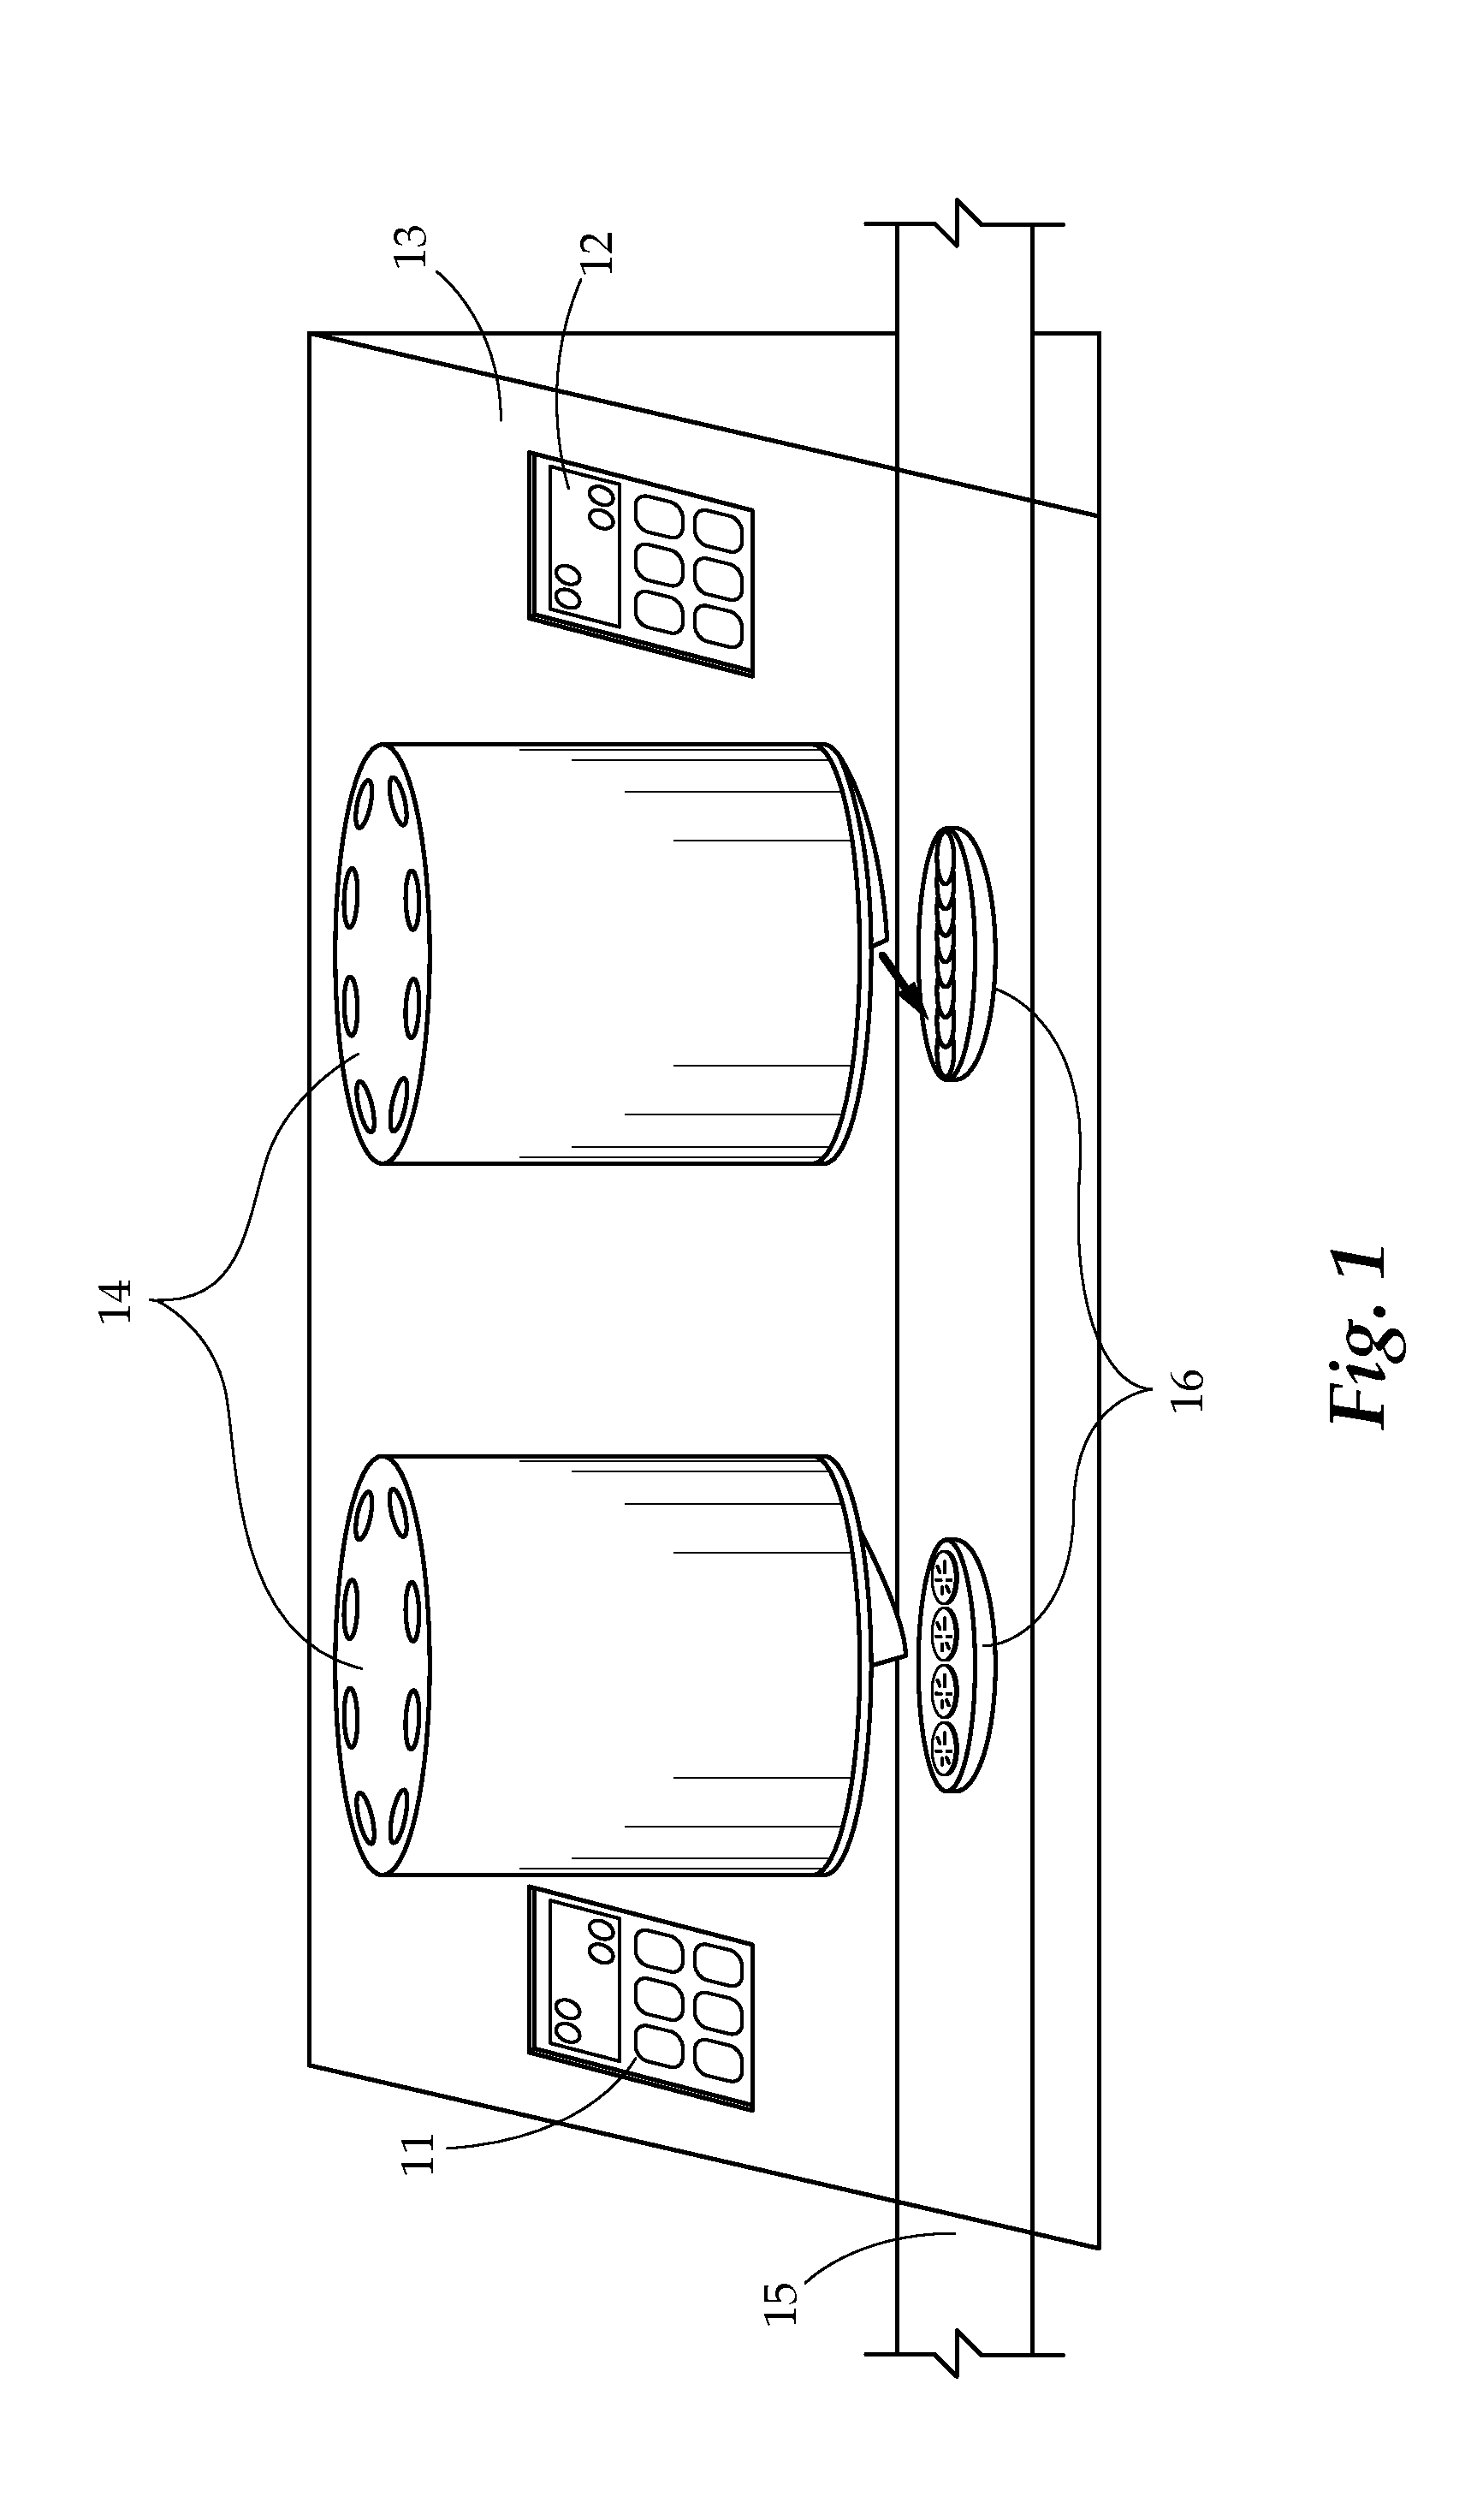 System and method for making food items